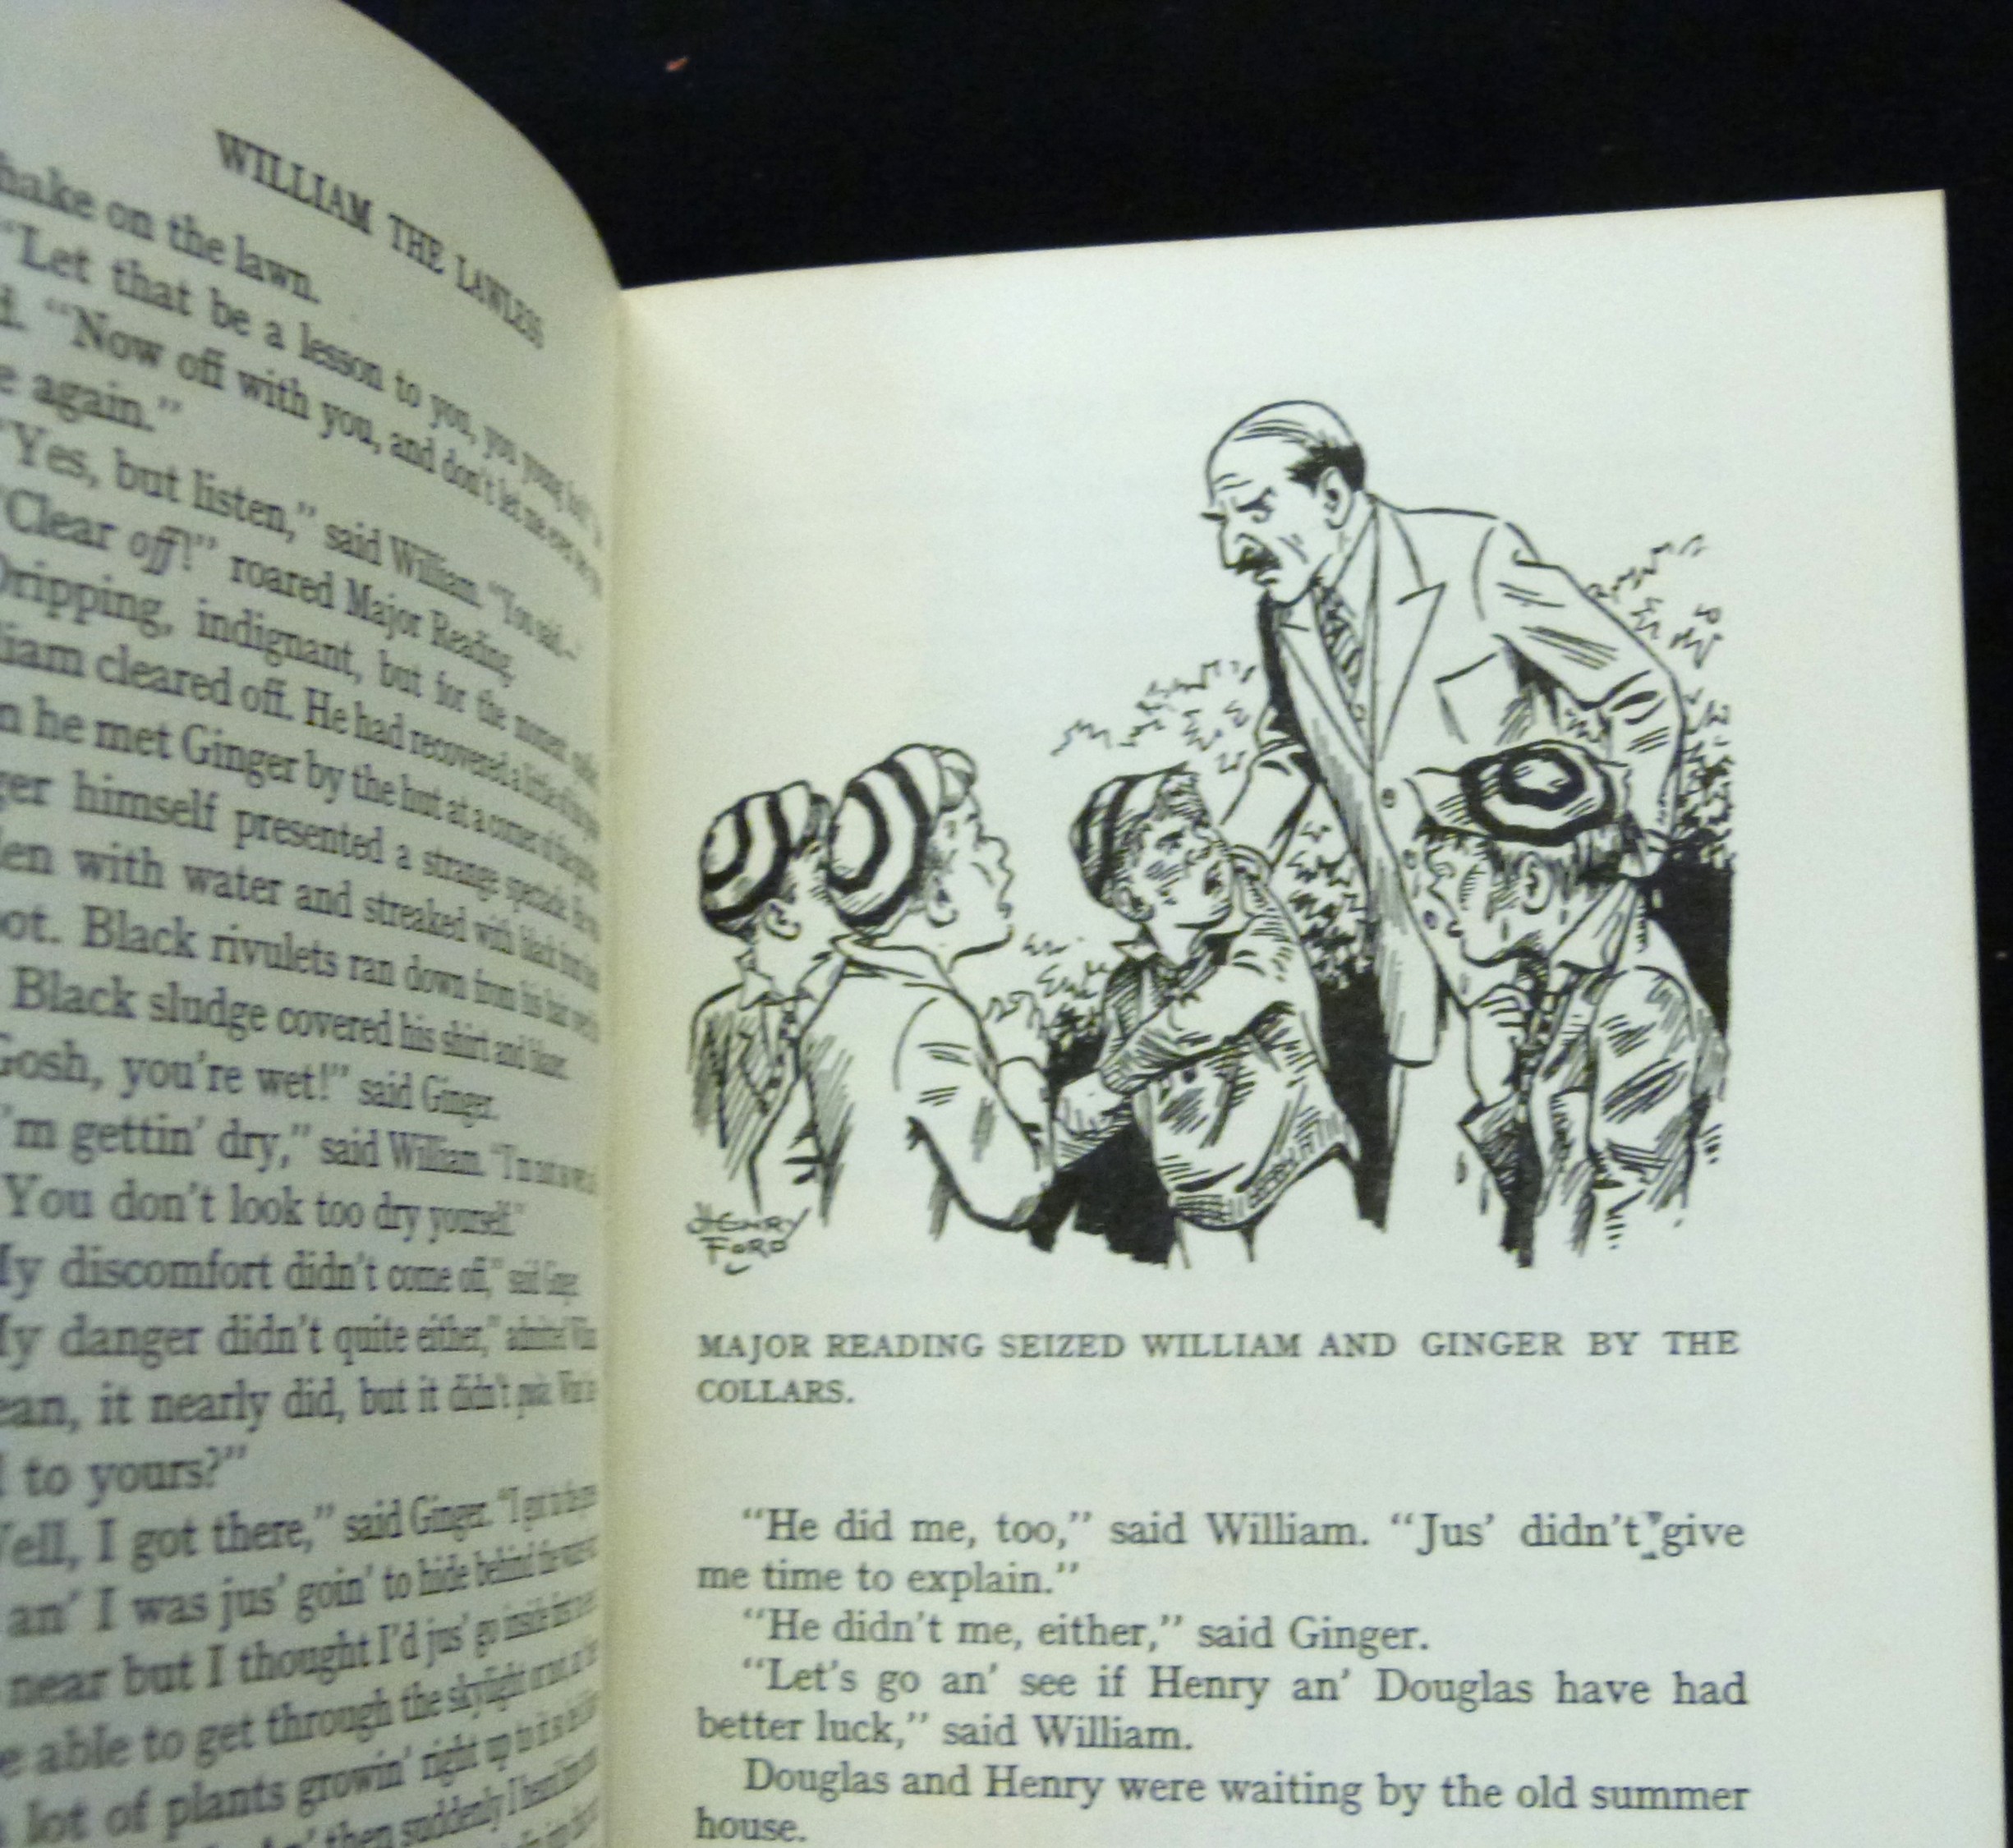 RICHMAL CROMPTON: WILLIAM THE LAWLESS, London, George Newnes, 1970, 1st edition, inscription on - Image 3 of 3